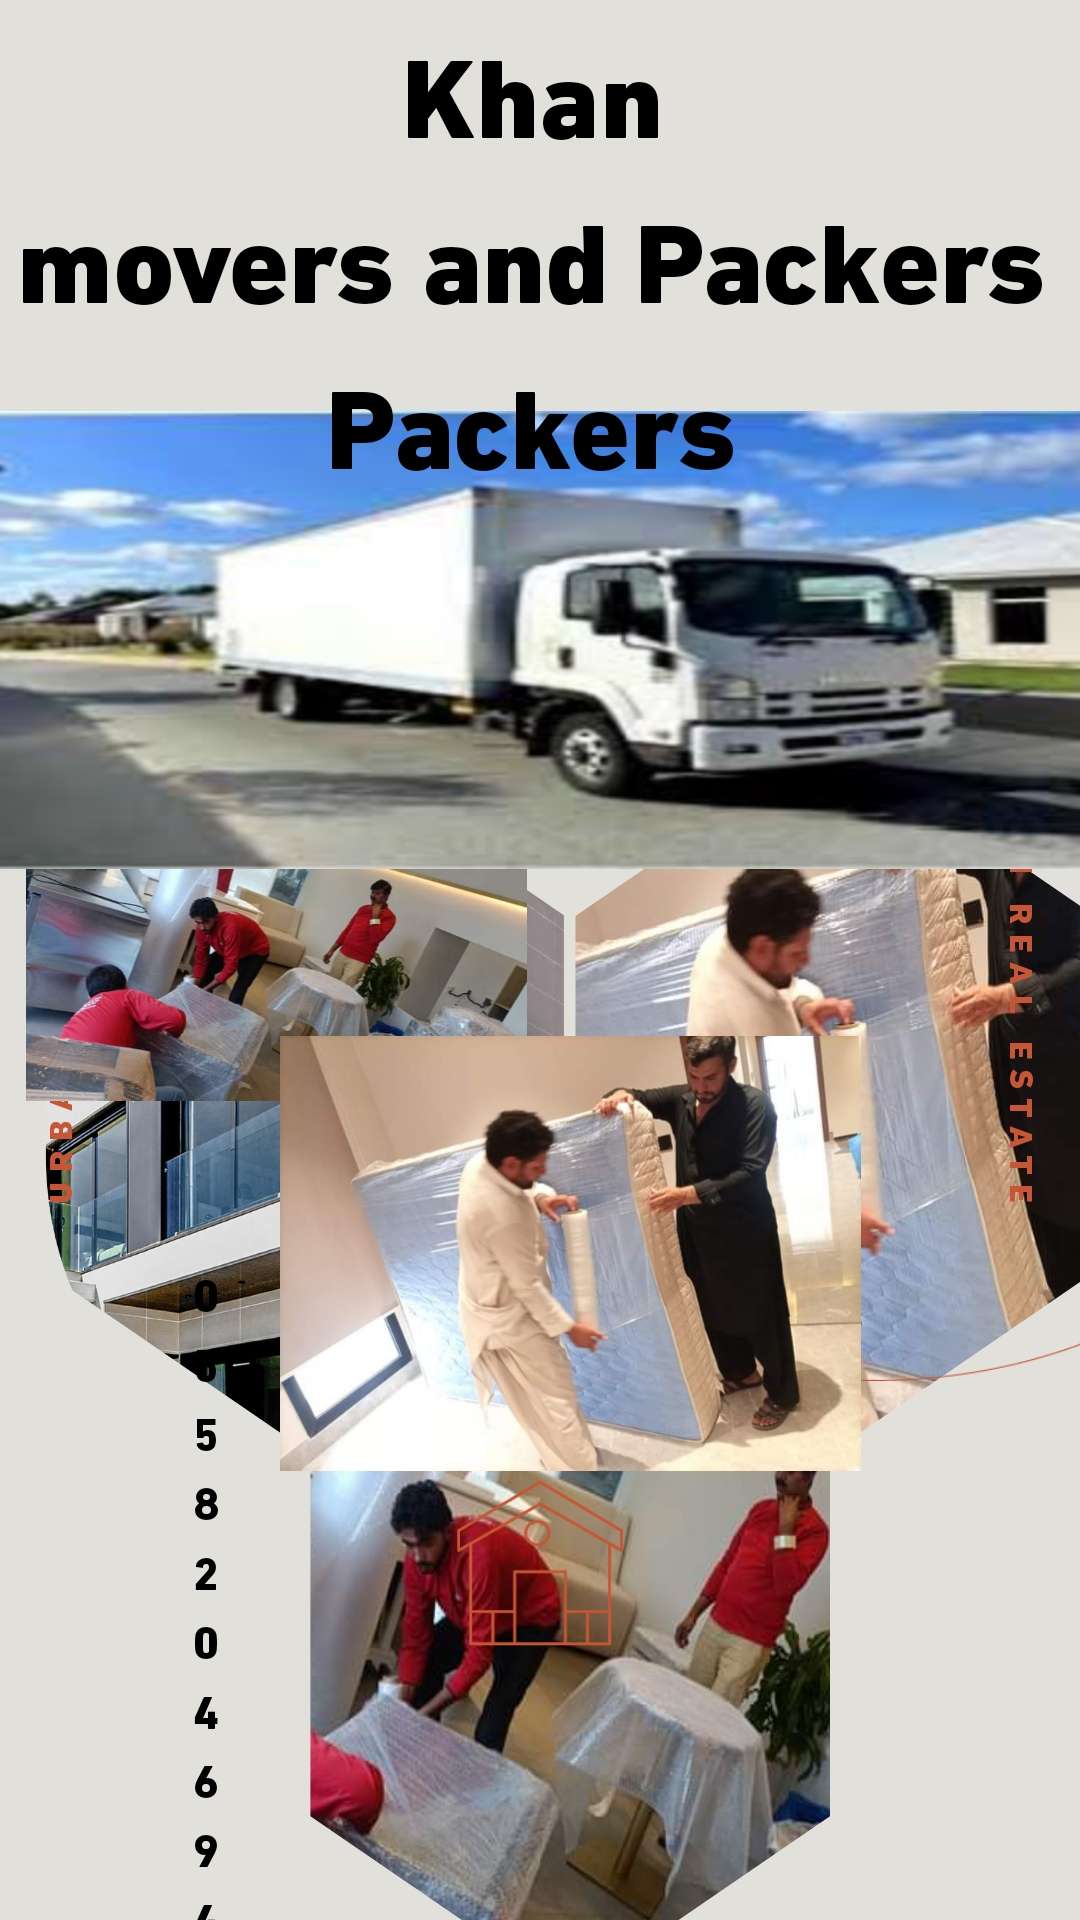 Riyadh movers and Packers,